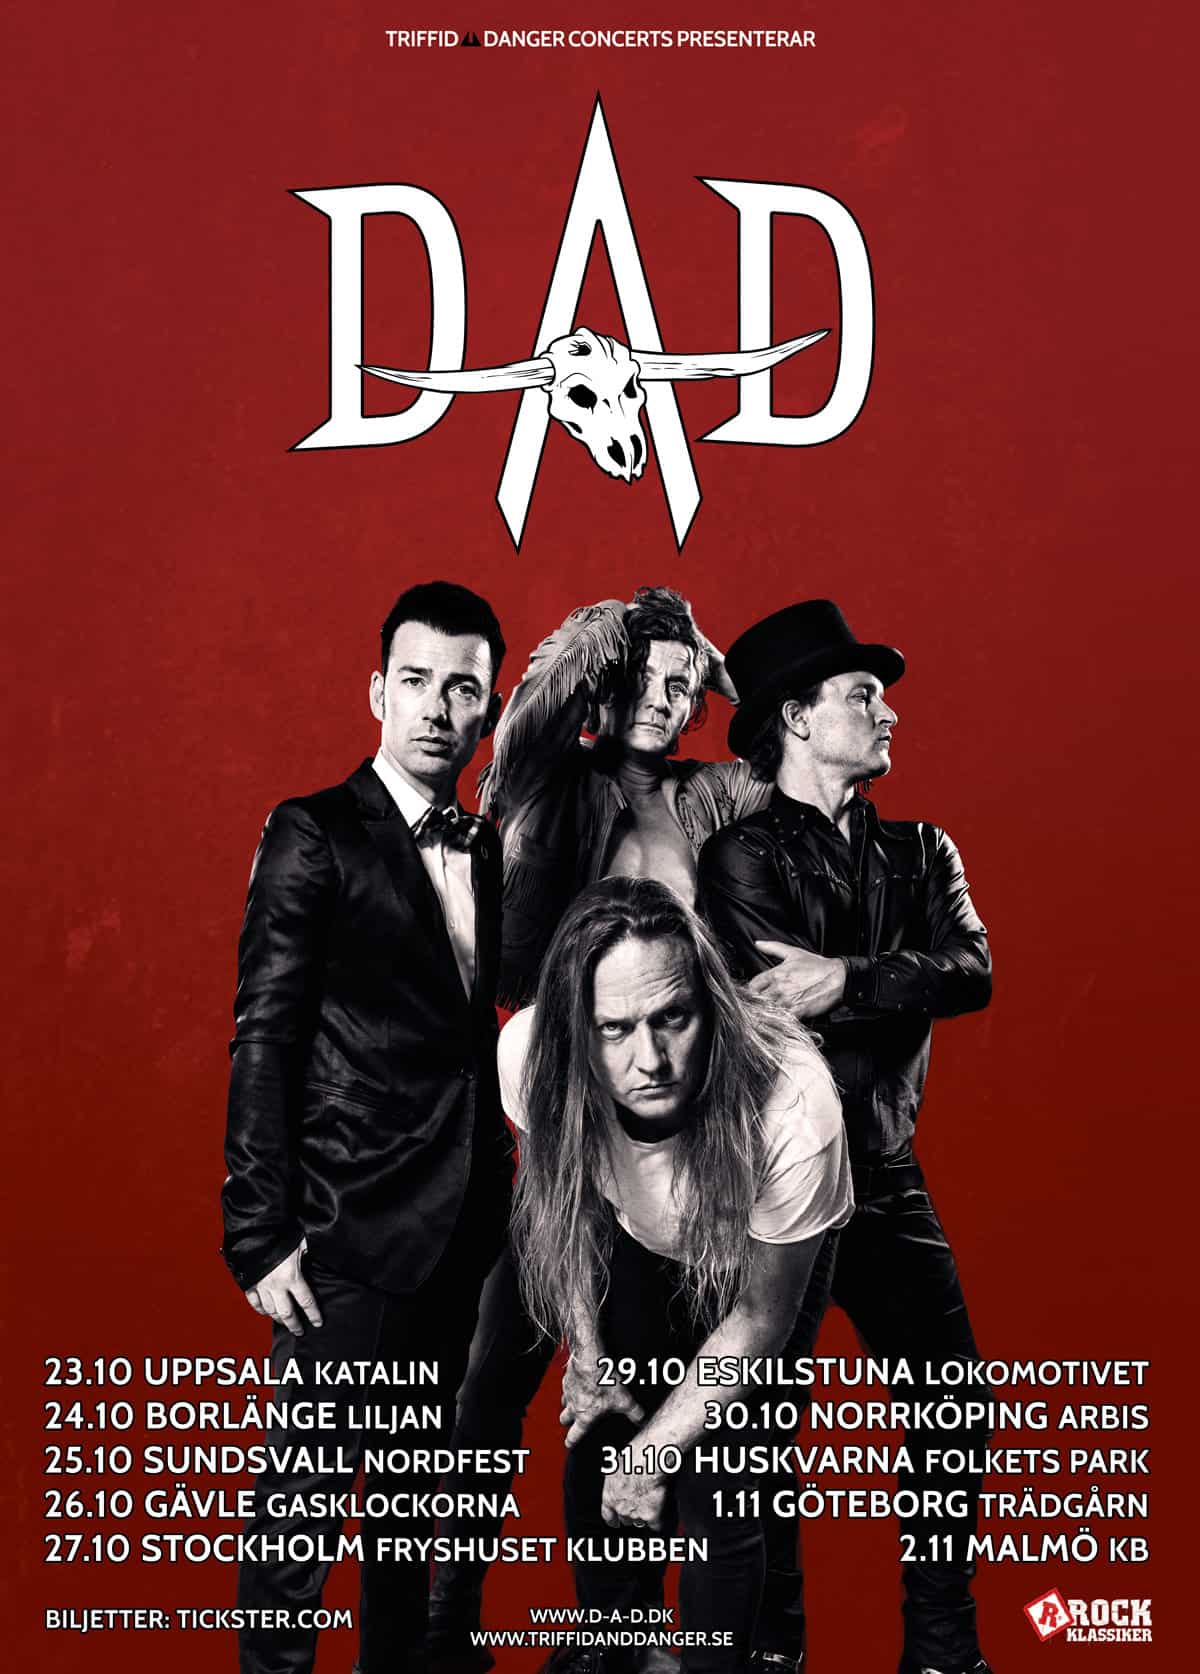 POSTER FOR SWEDEN TOUR 2019